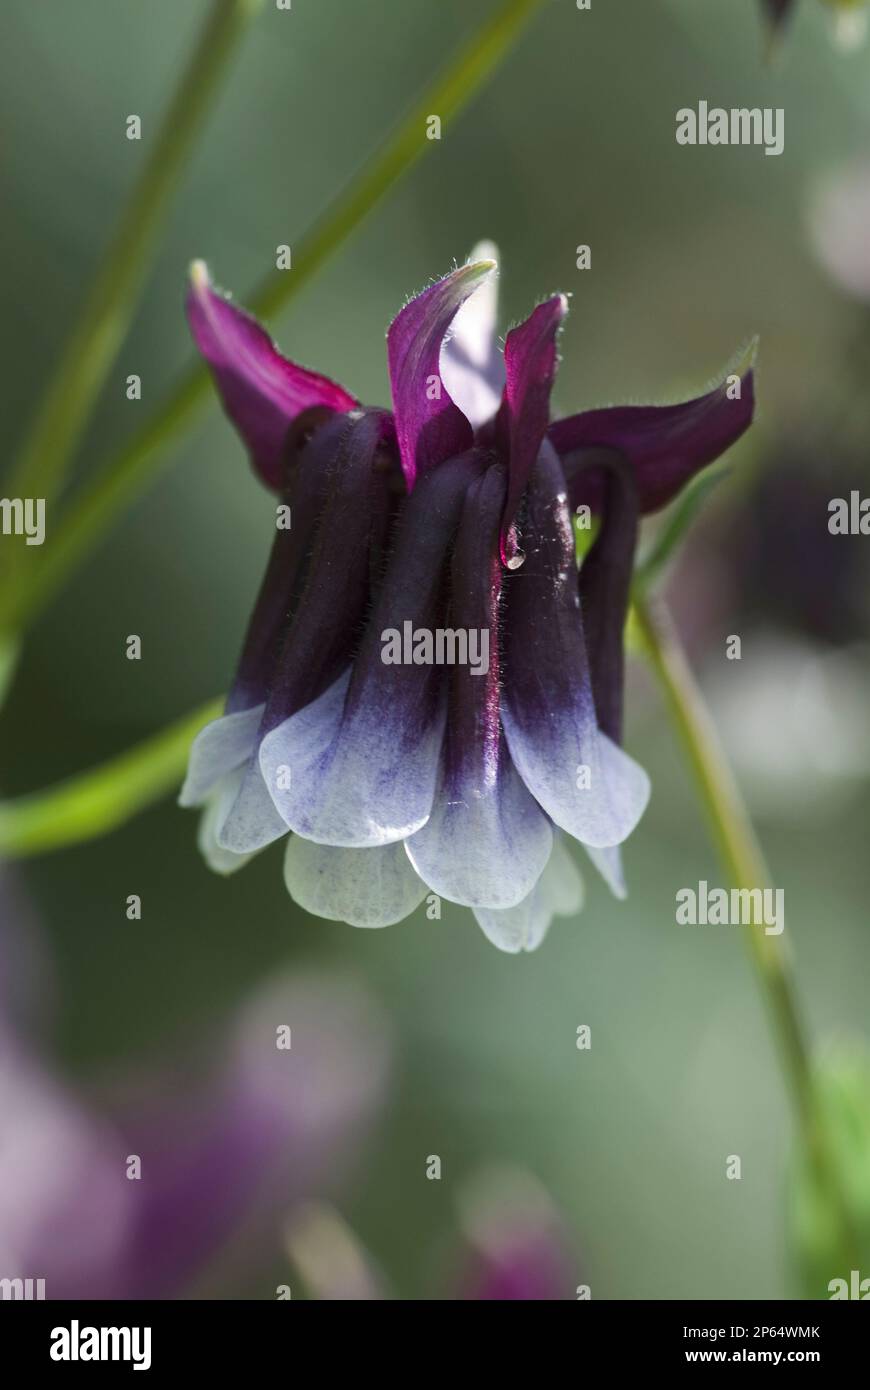 Aquilegia dramatic dark purple and white drooping bell flowerhead close-up Stock Photo